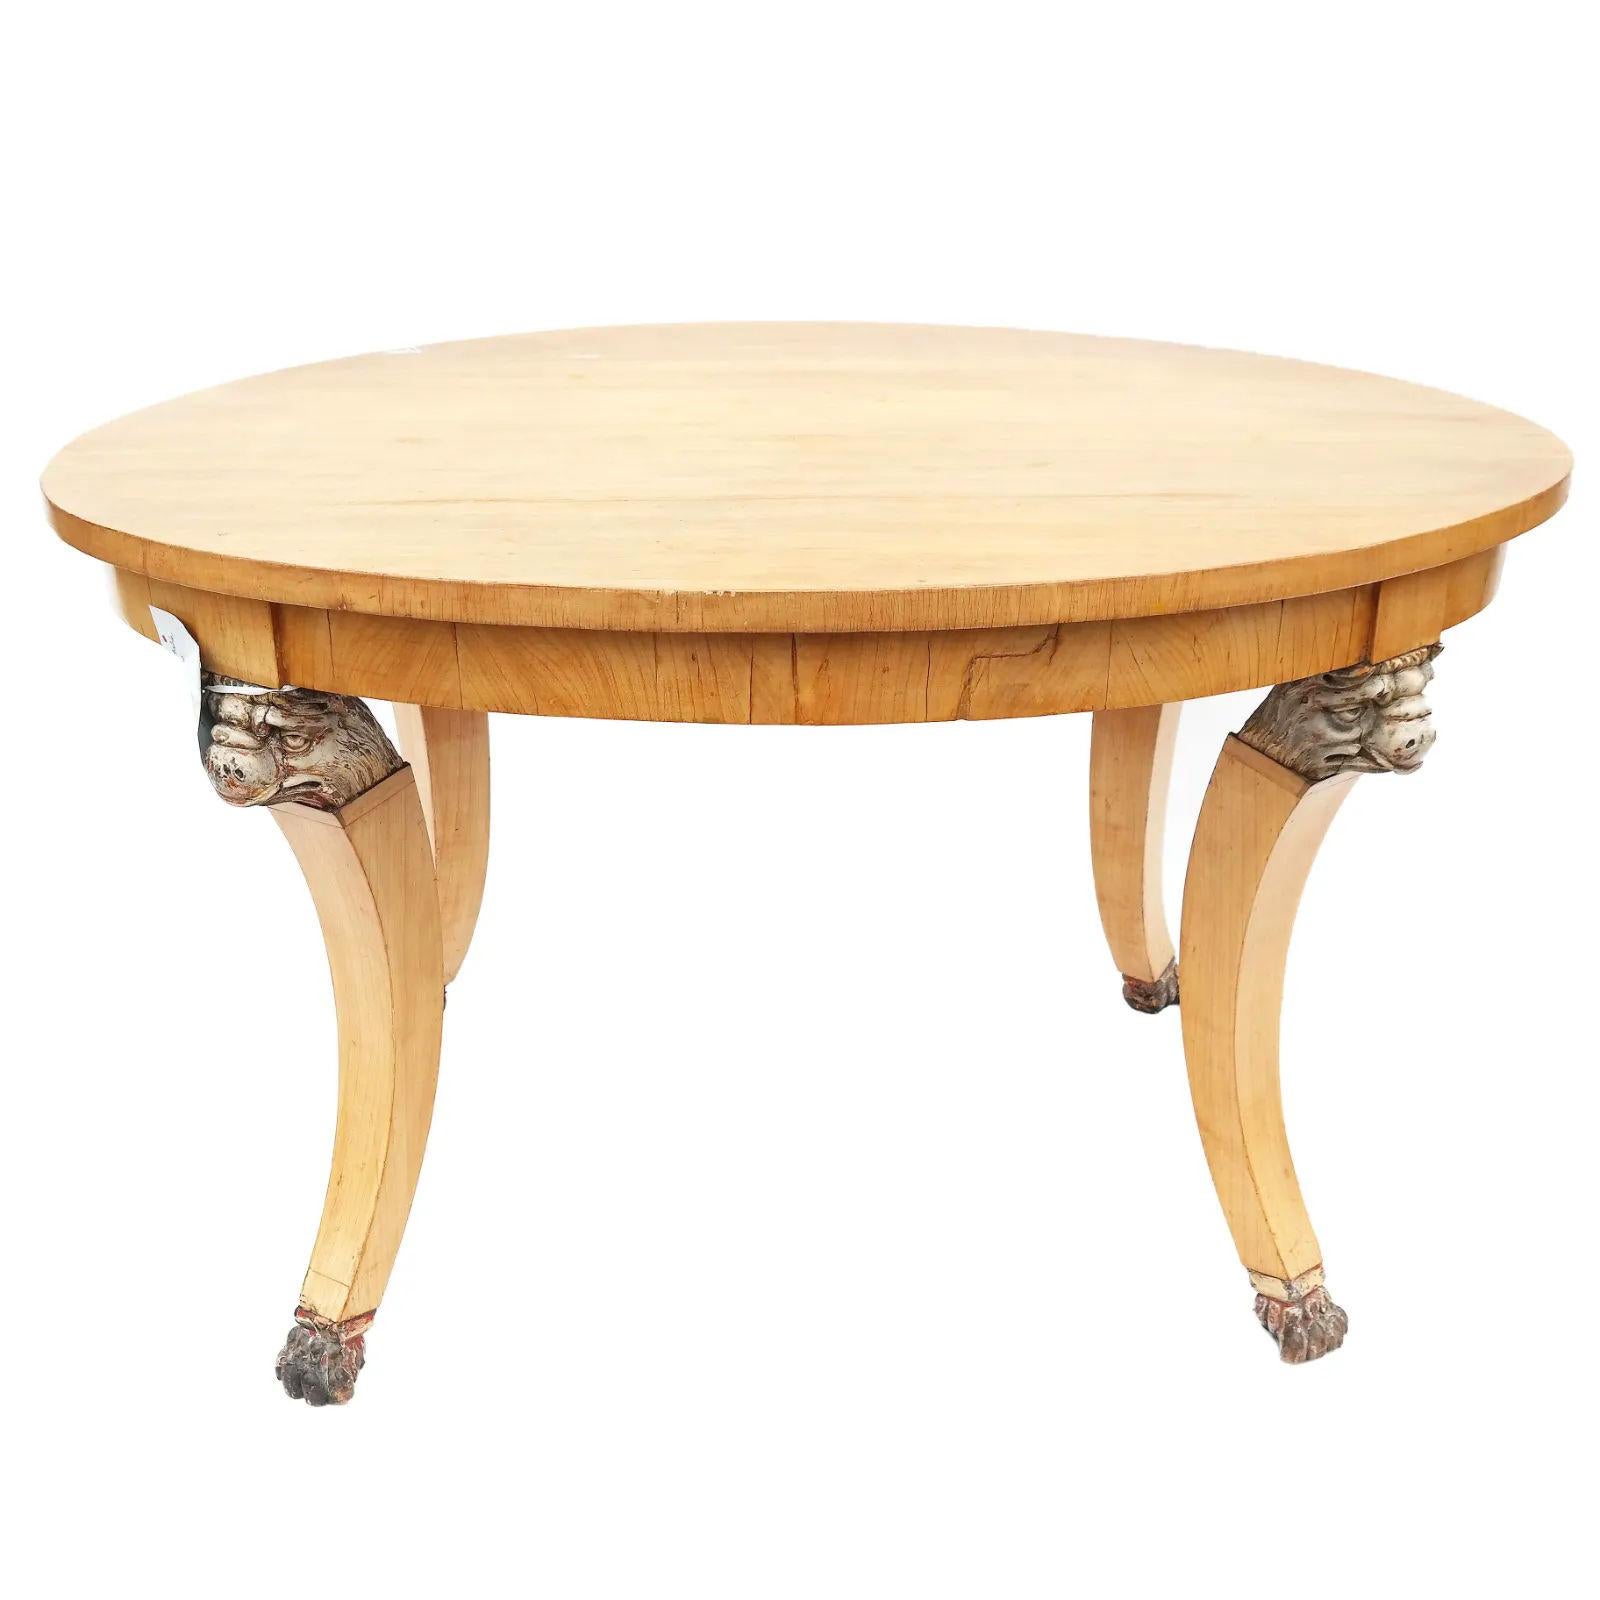 Russian Empire Period Birch Center Table In Good Condition For Sale In New York, US